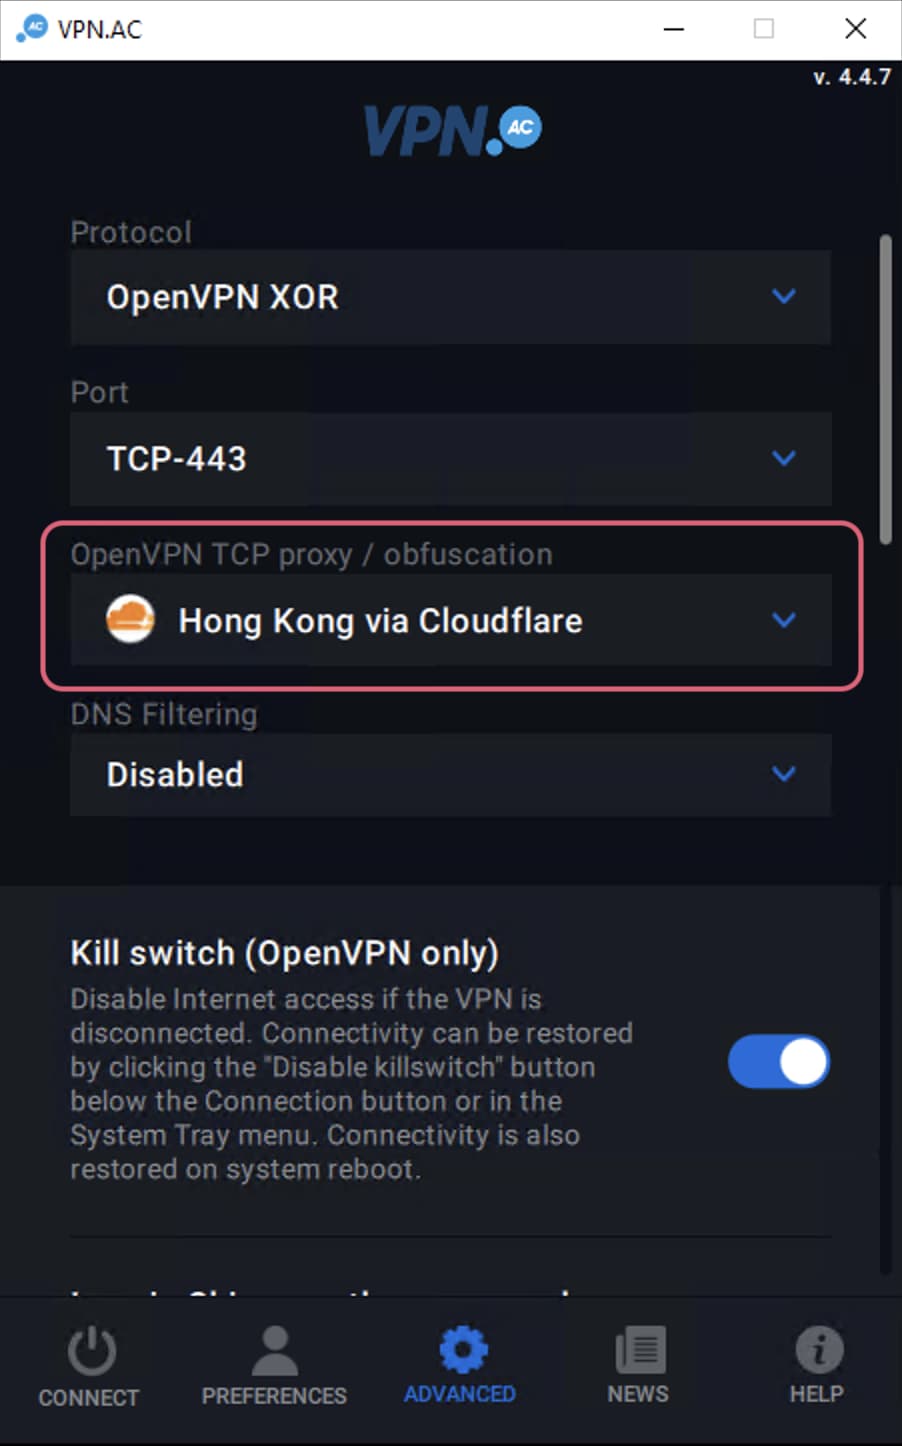 Screenshot of VPN.ac's Advanced Settings on Windows. The OpenVPN TCP proxy / obfuscation options is highlighted.